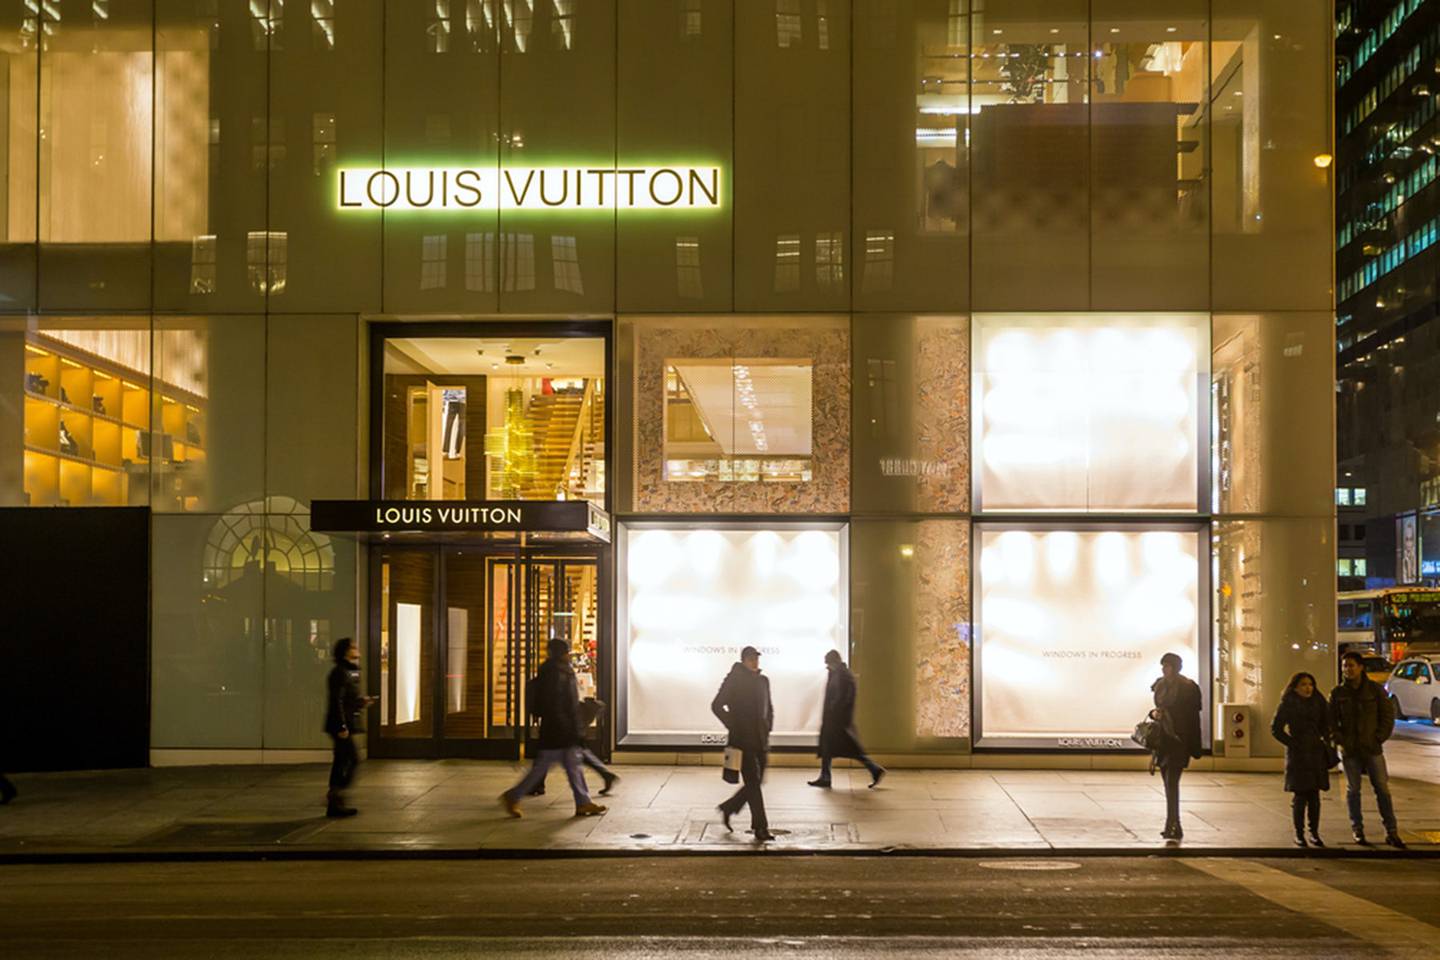 The exterior of a Louis Vuitton store.